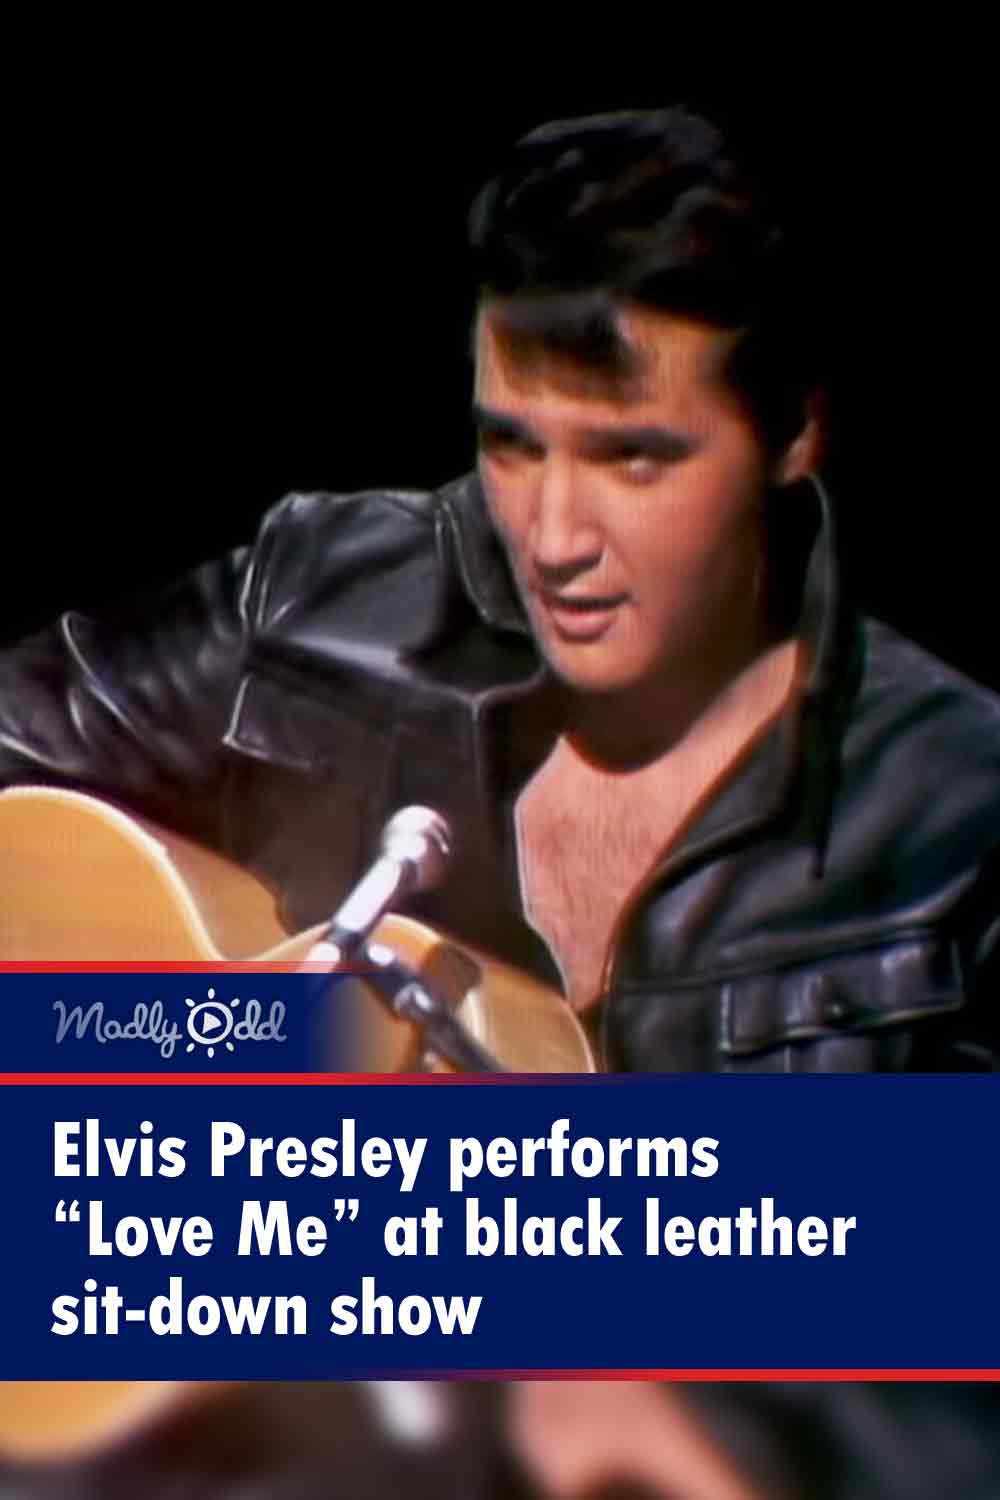 Elvis Presley performs “Love Me” at black leather sit-down show